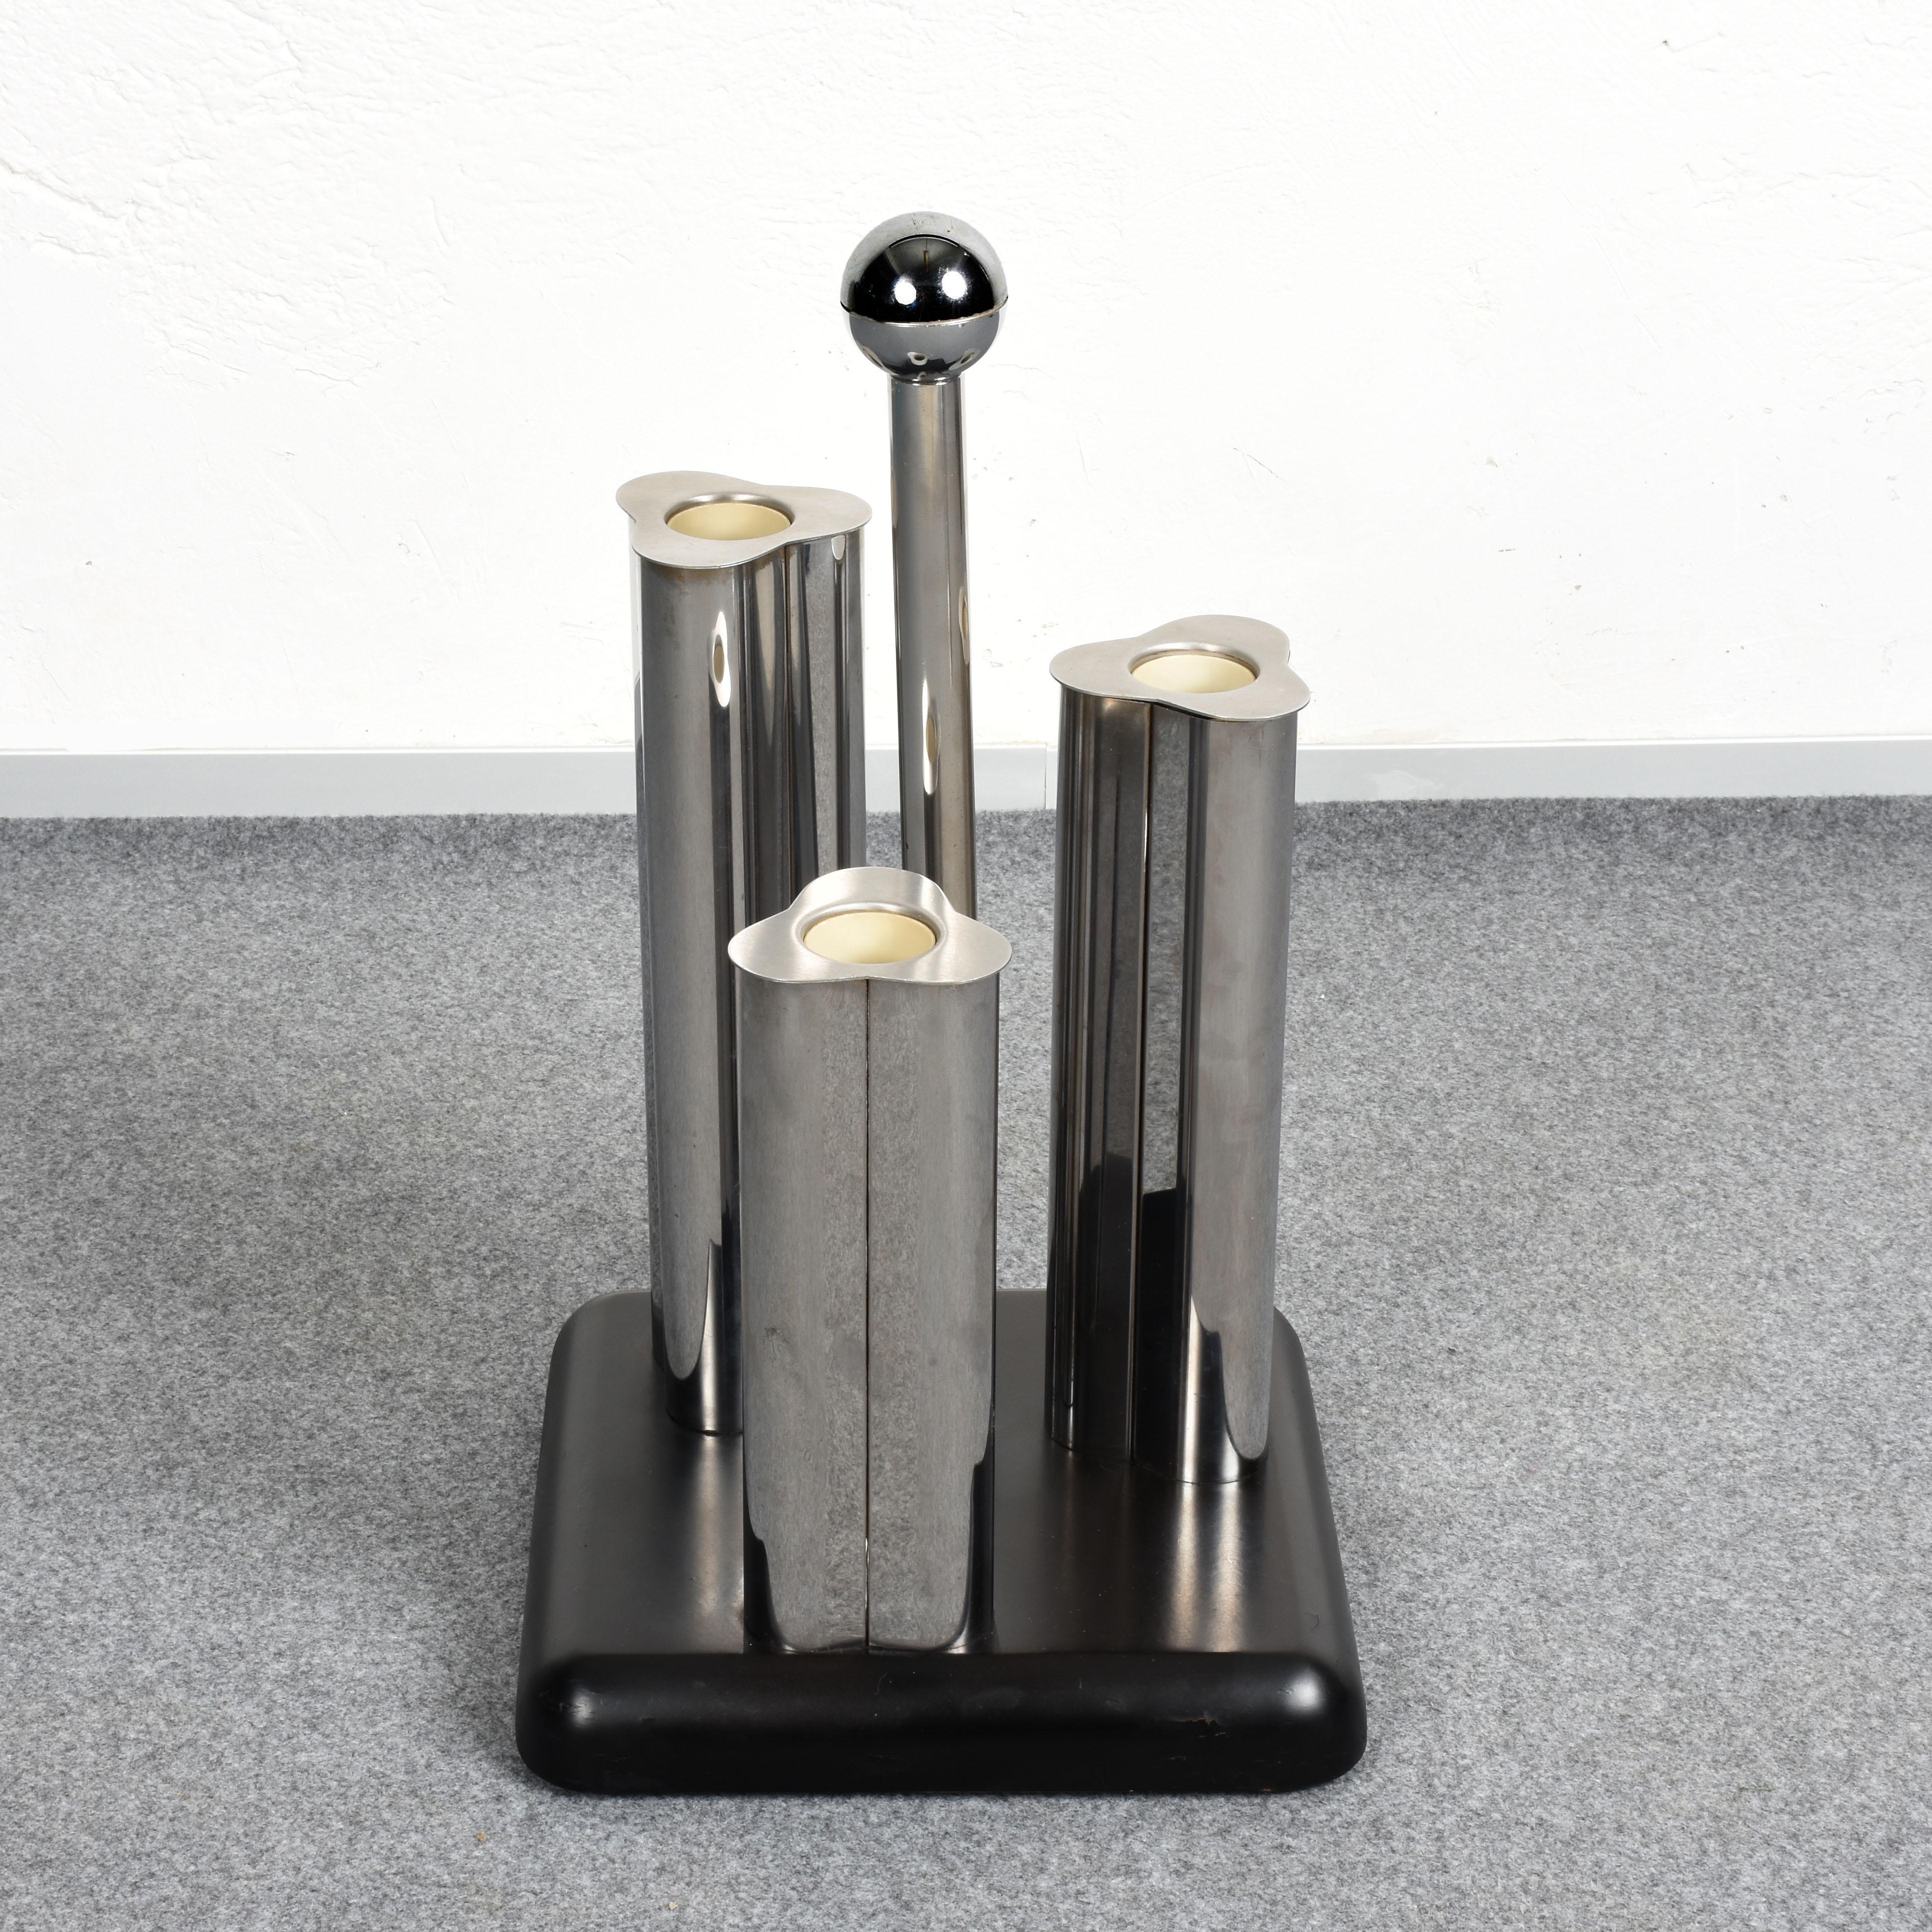 Mid-Century Modern Umbrella Stand Black, Italian, Lacquered Wood and Metal, Italy, 1970s Vintage For Sale